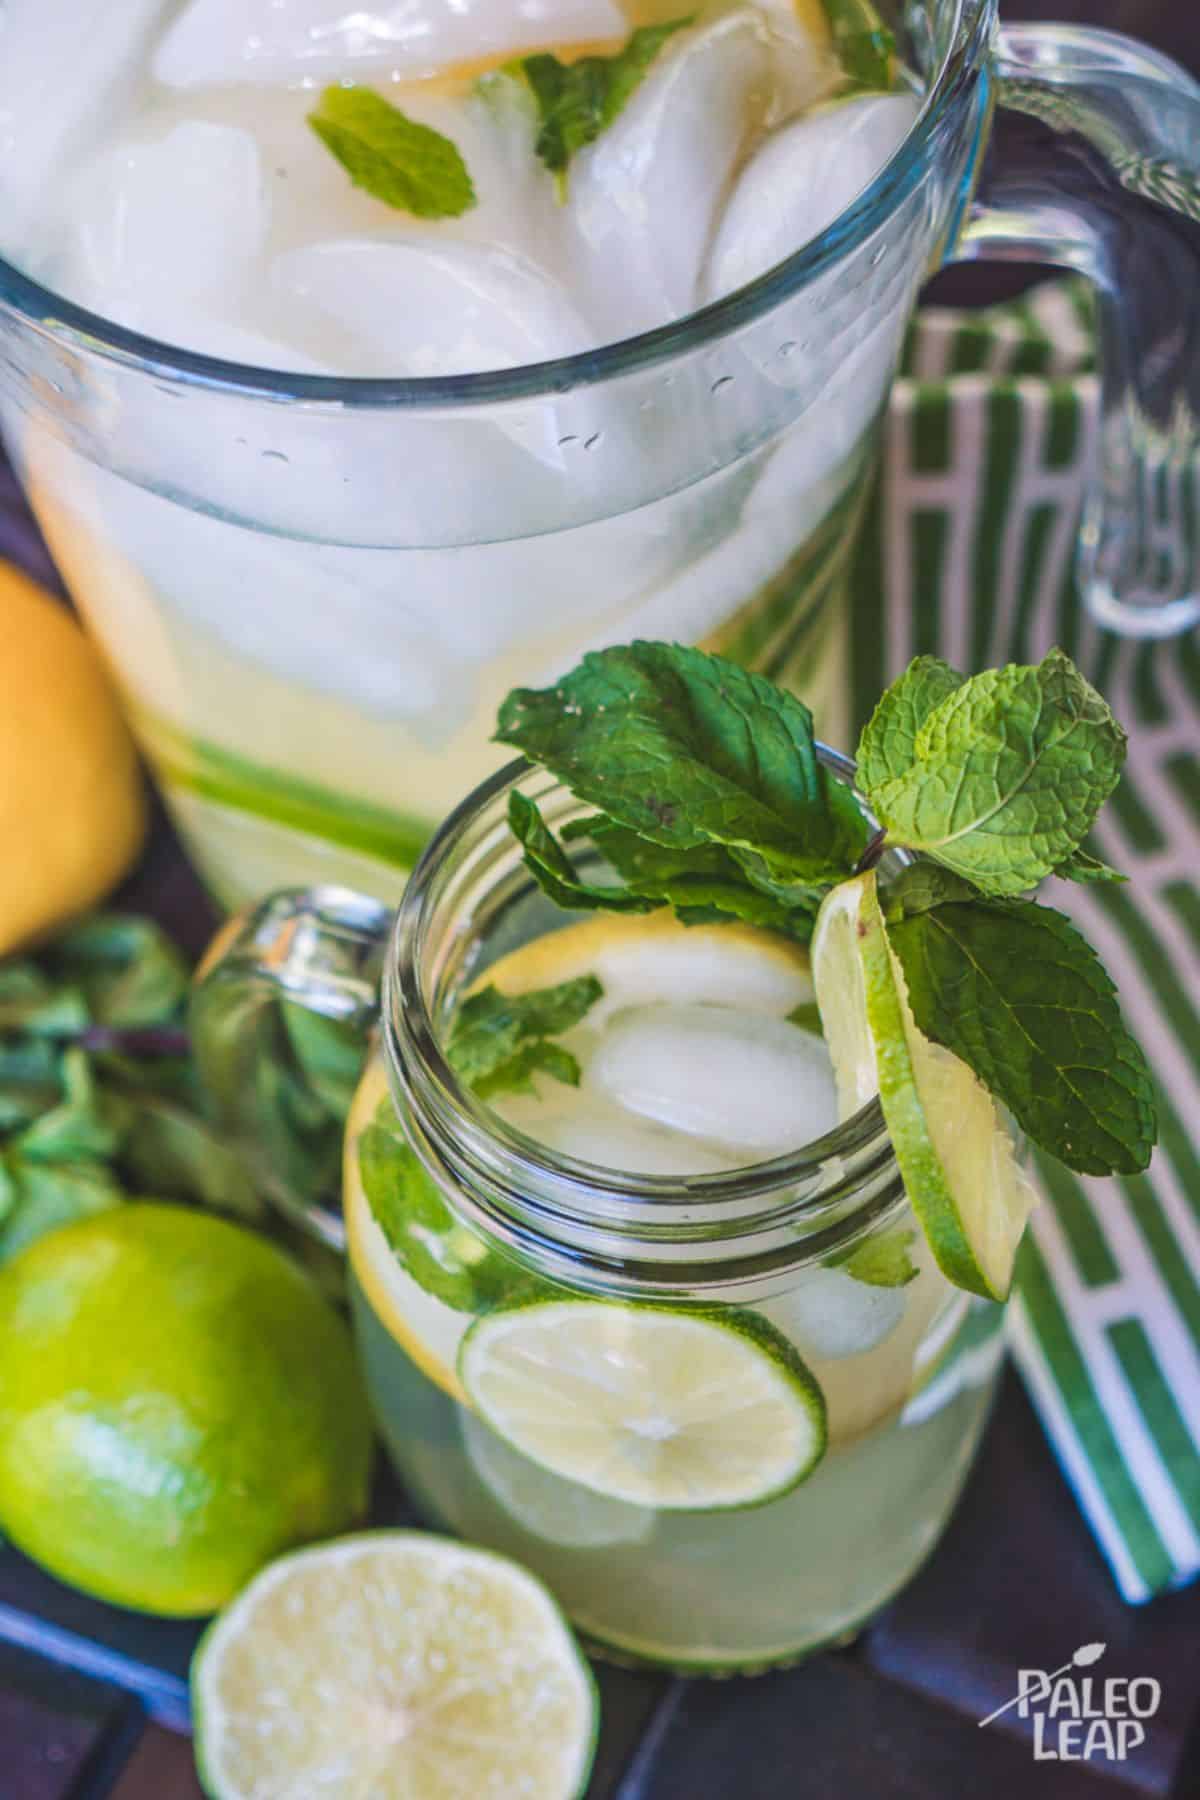 Mint And Citrus Water in a glass cup.